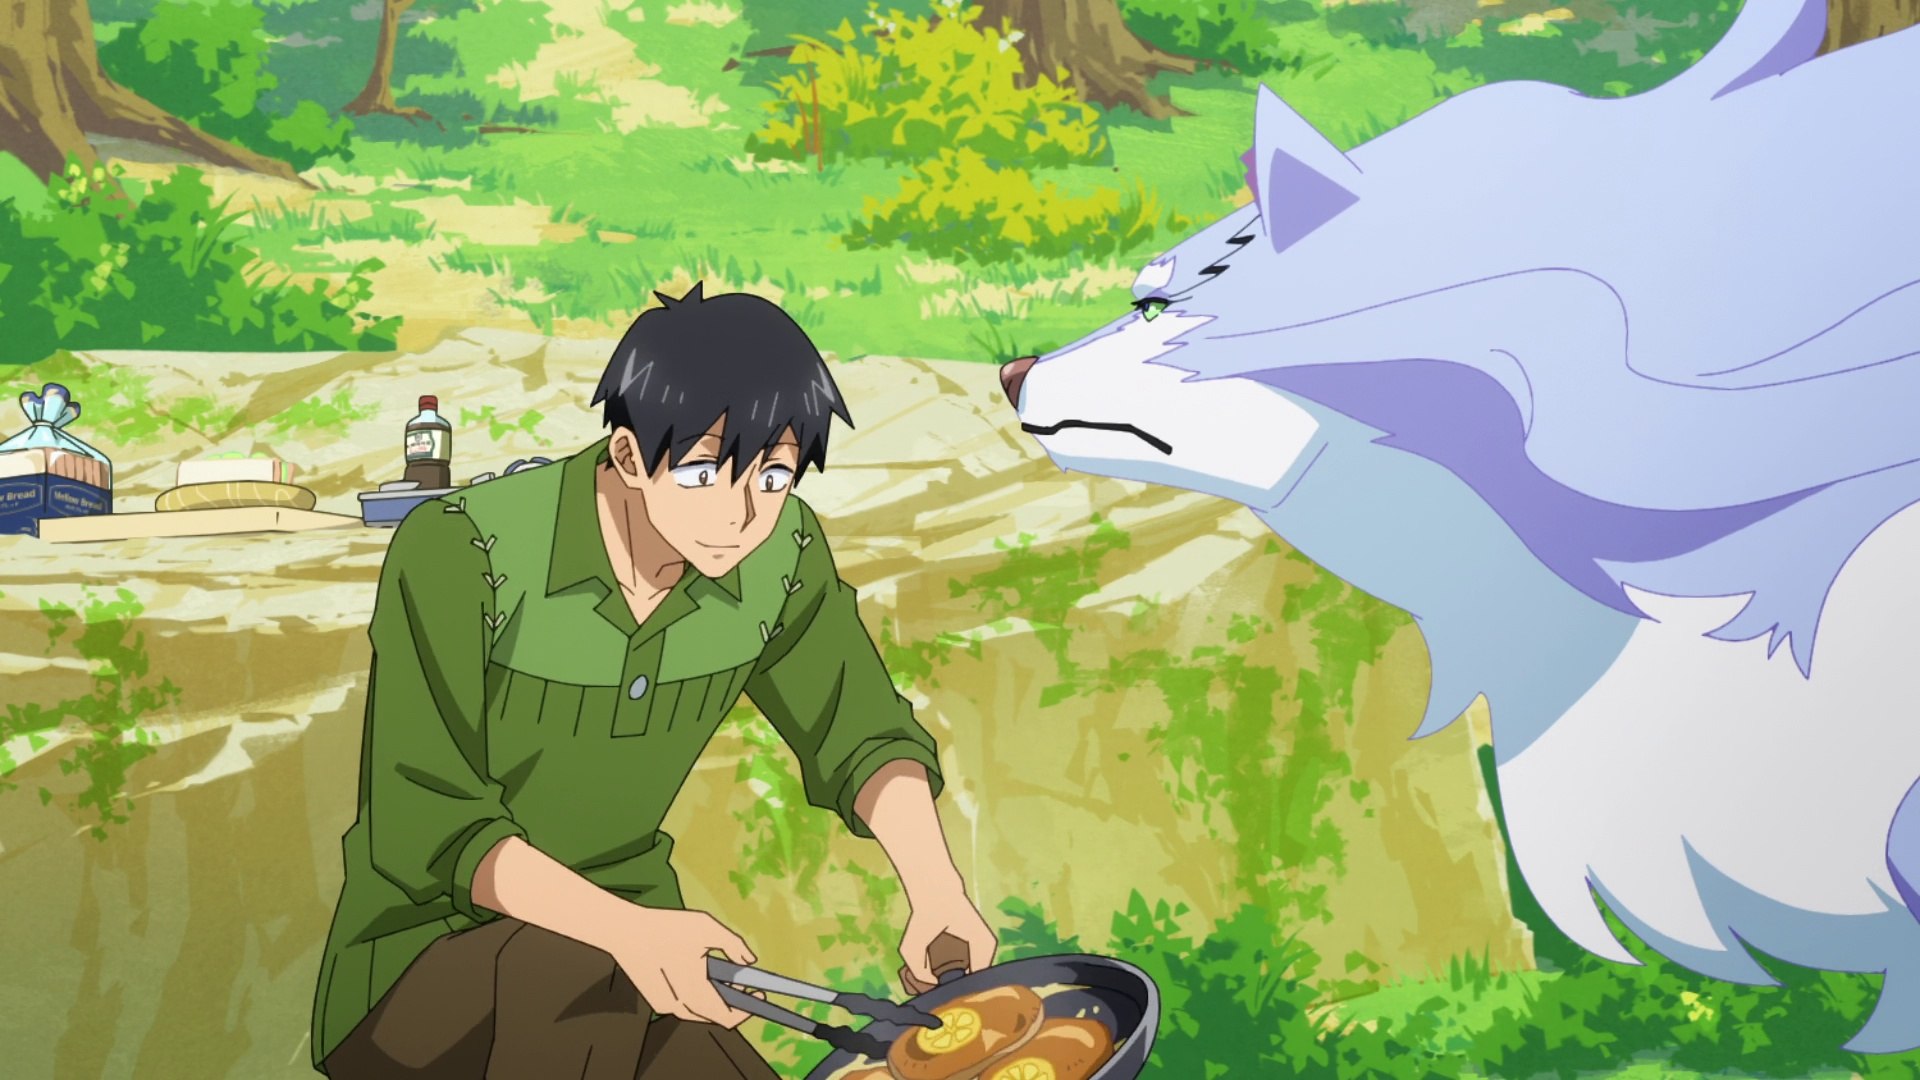 Watch Campfire Cooking in Another World with My Absurd Skill